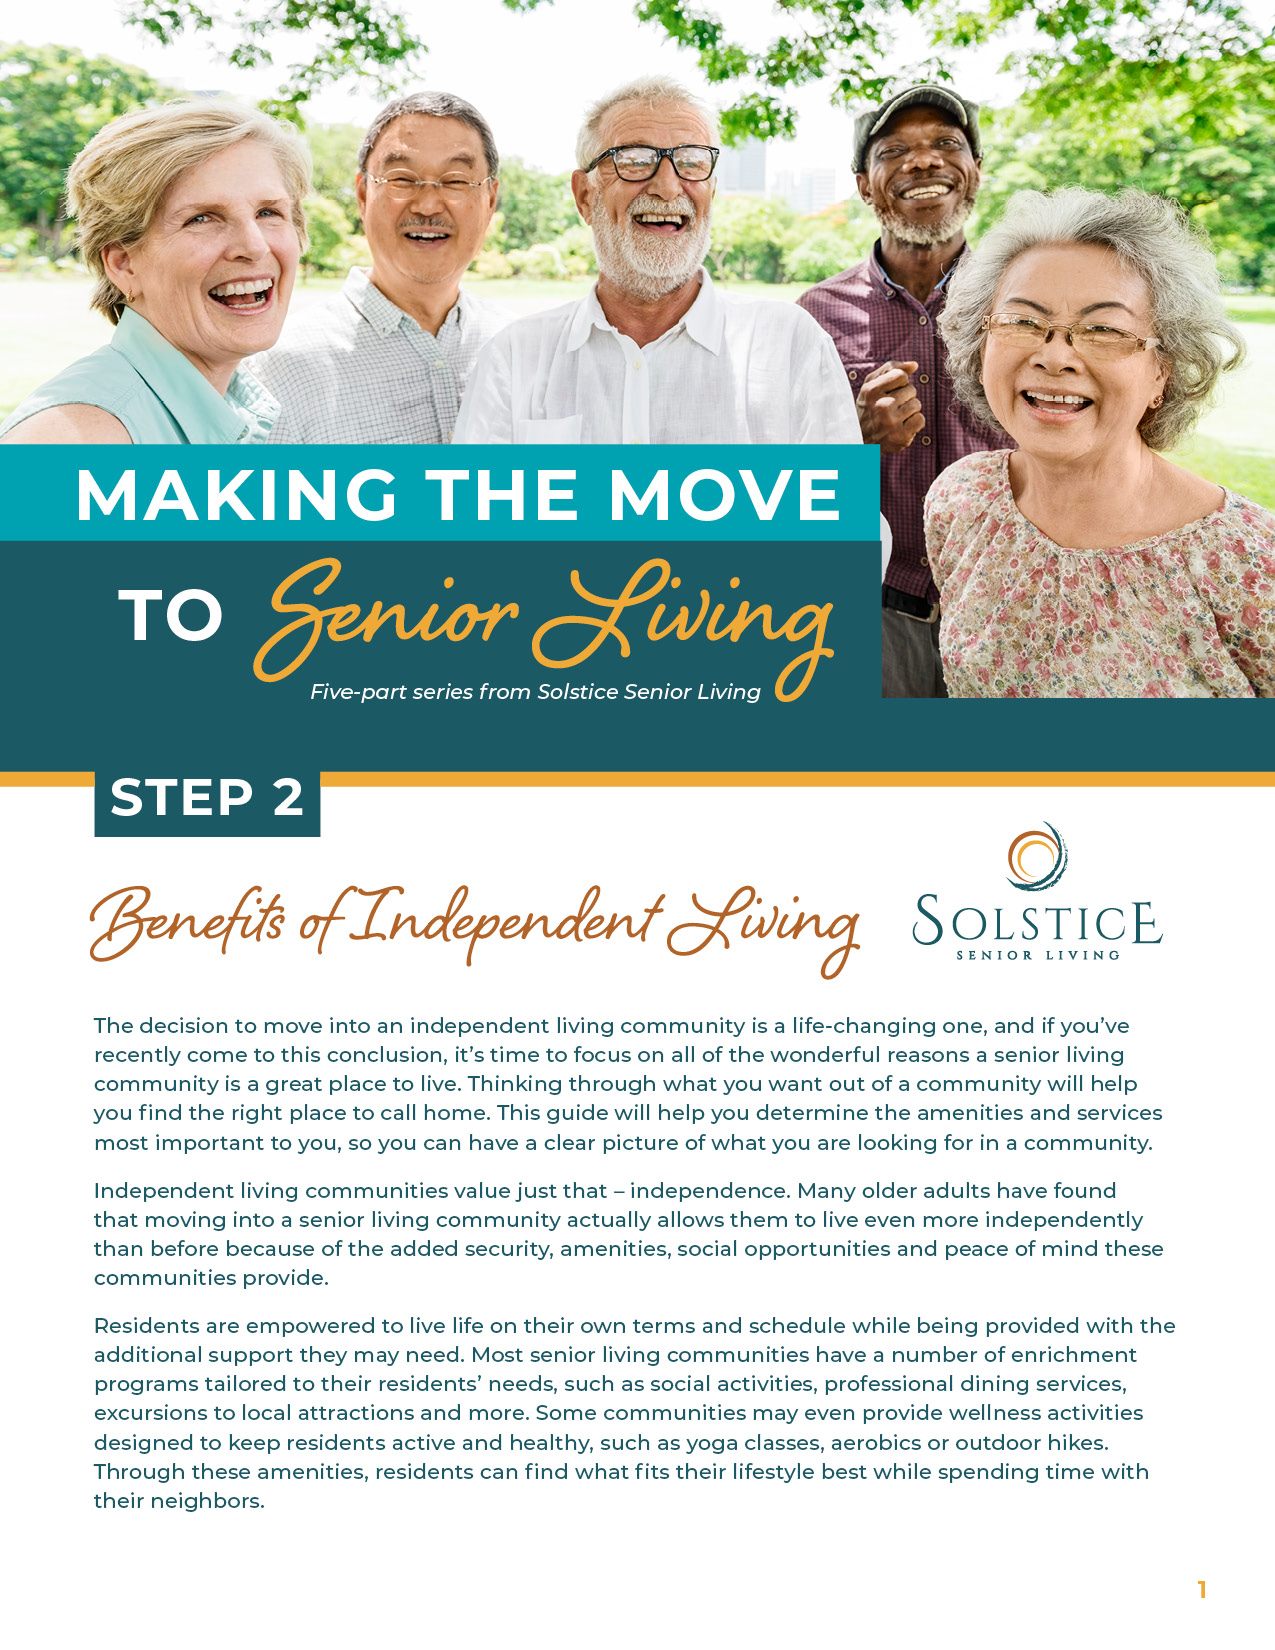 Step 2: Benefits of Independent Living